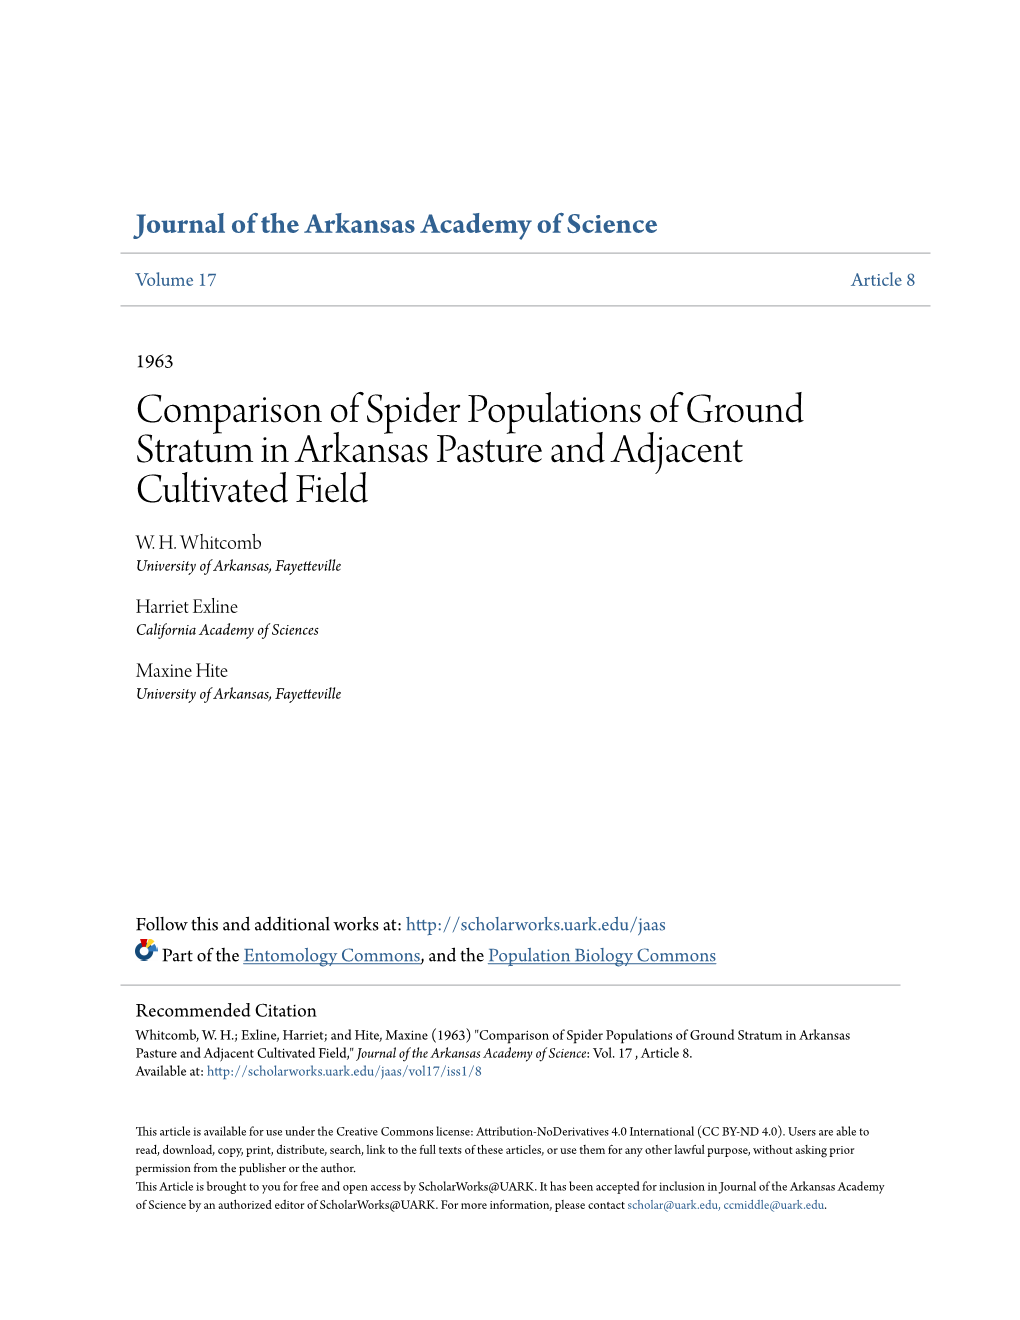 Comparison of Spider Populations of Ground Stratum in Arkansas Pasture and Adjacent Cultivated Field W